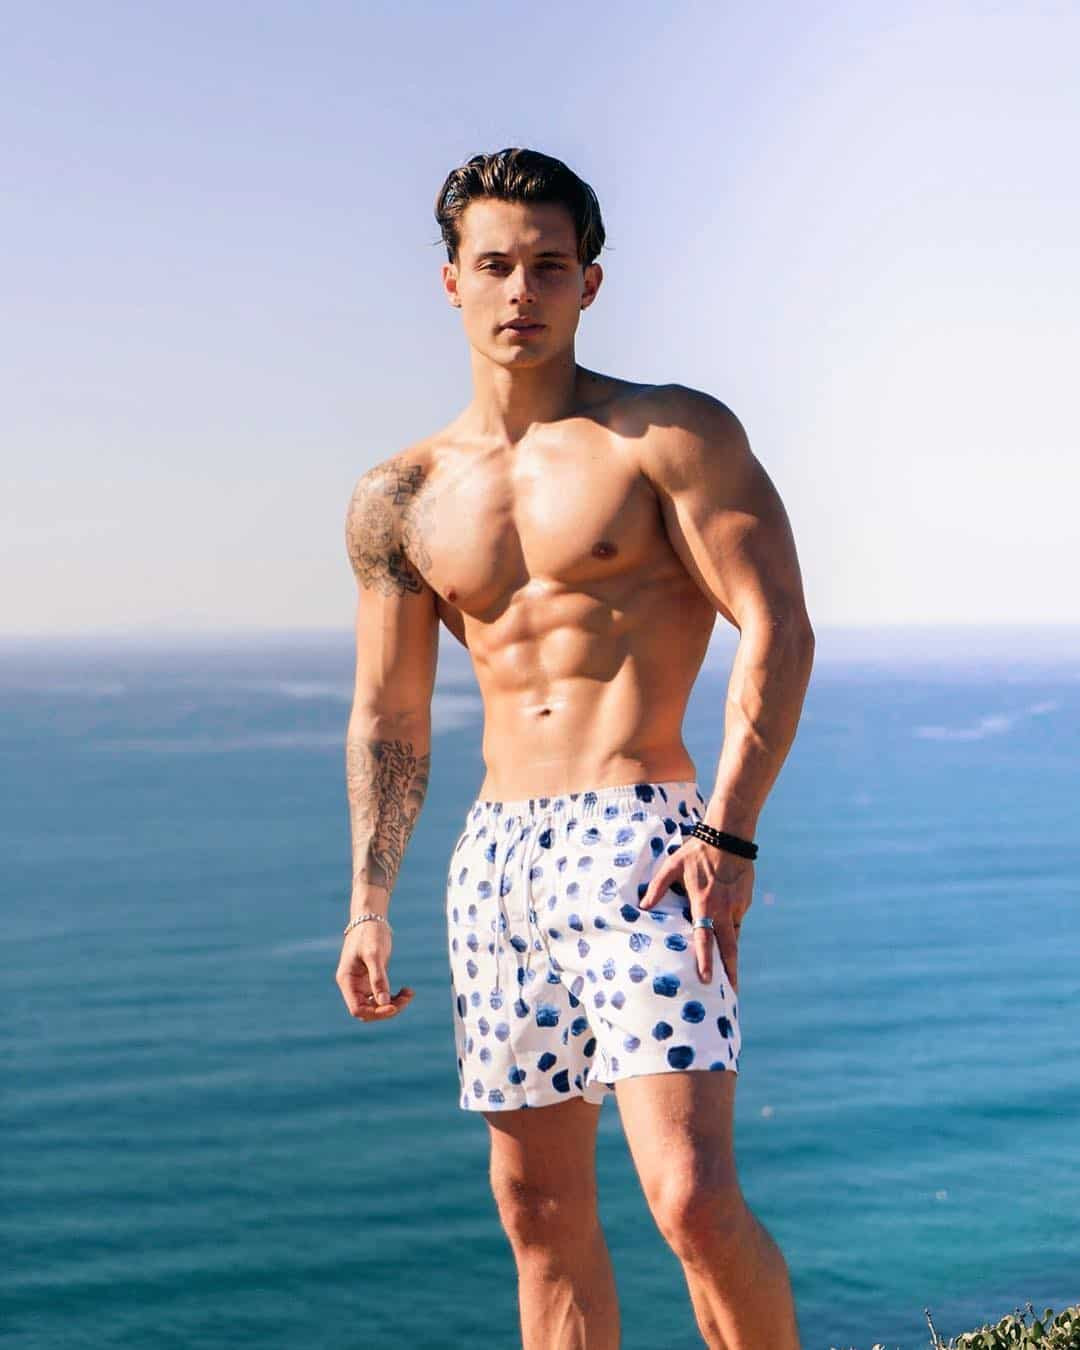 Mens Haircuts Fall 2020
 Top 6 Mens Shorts Styles 2020 Best Options for Shorts for